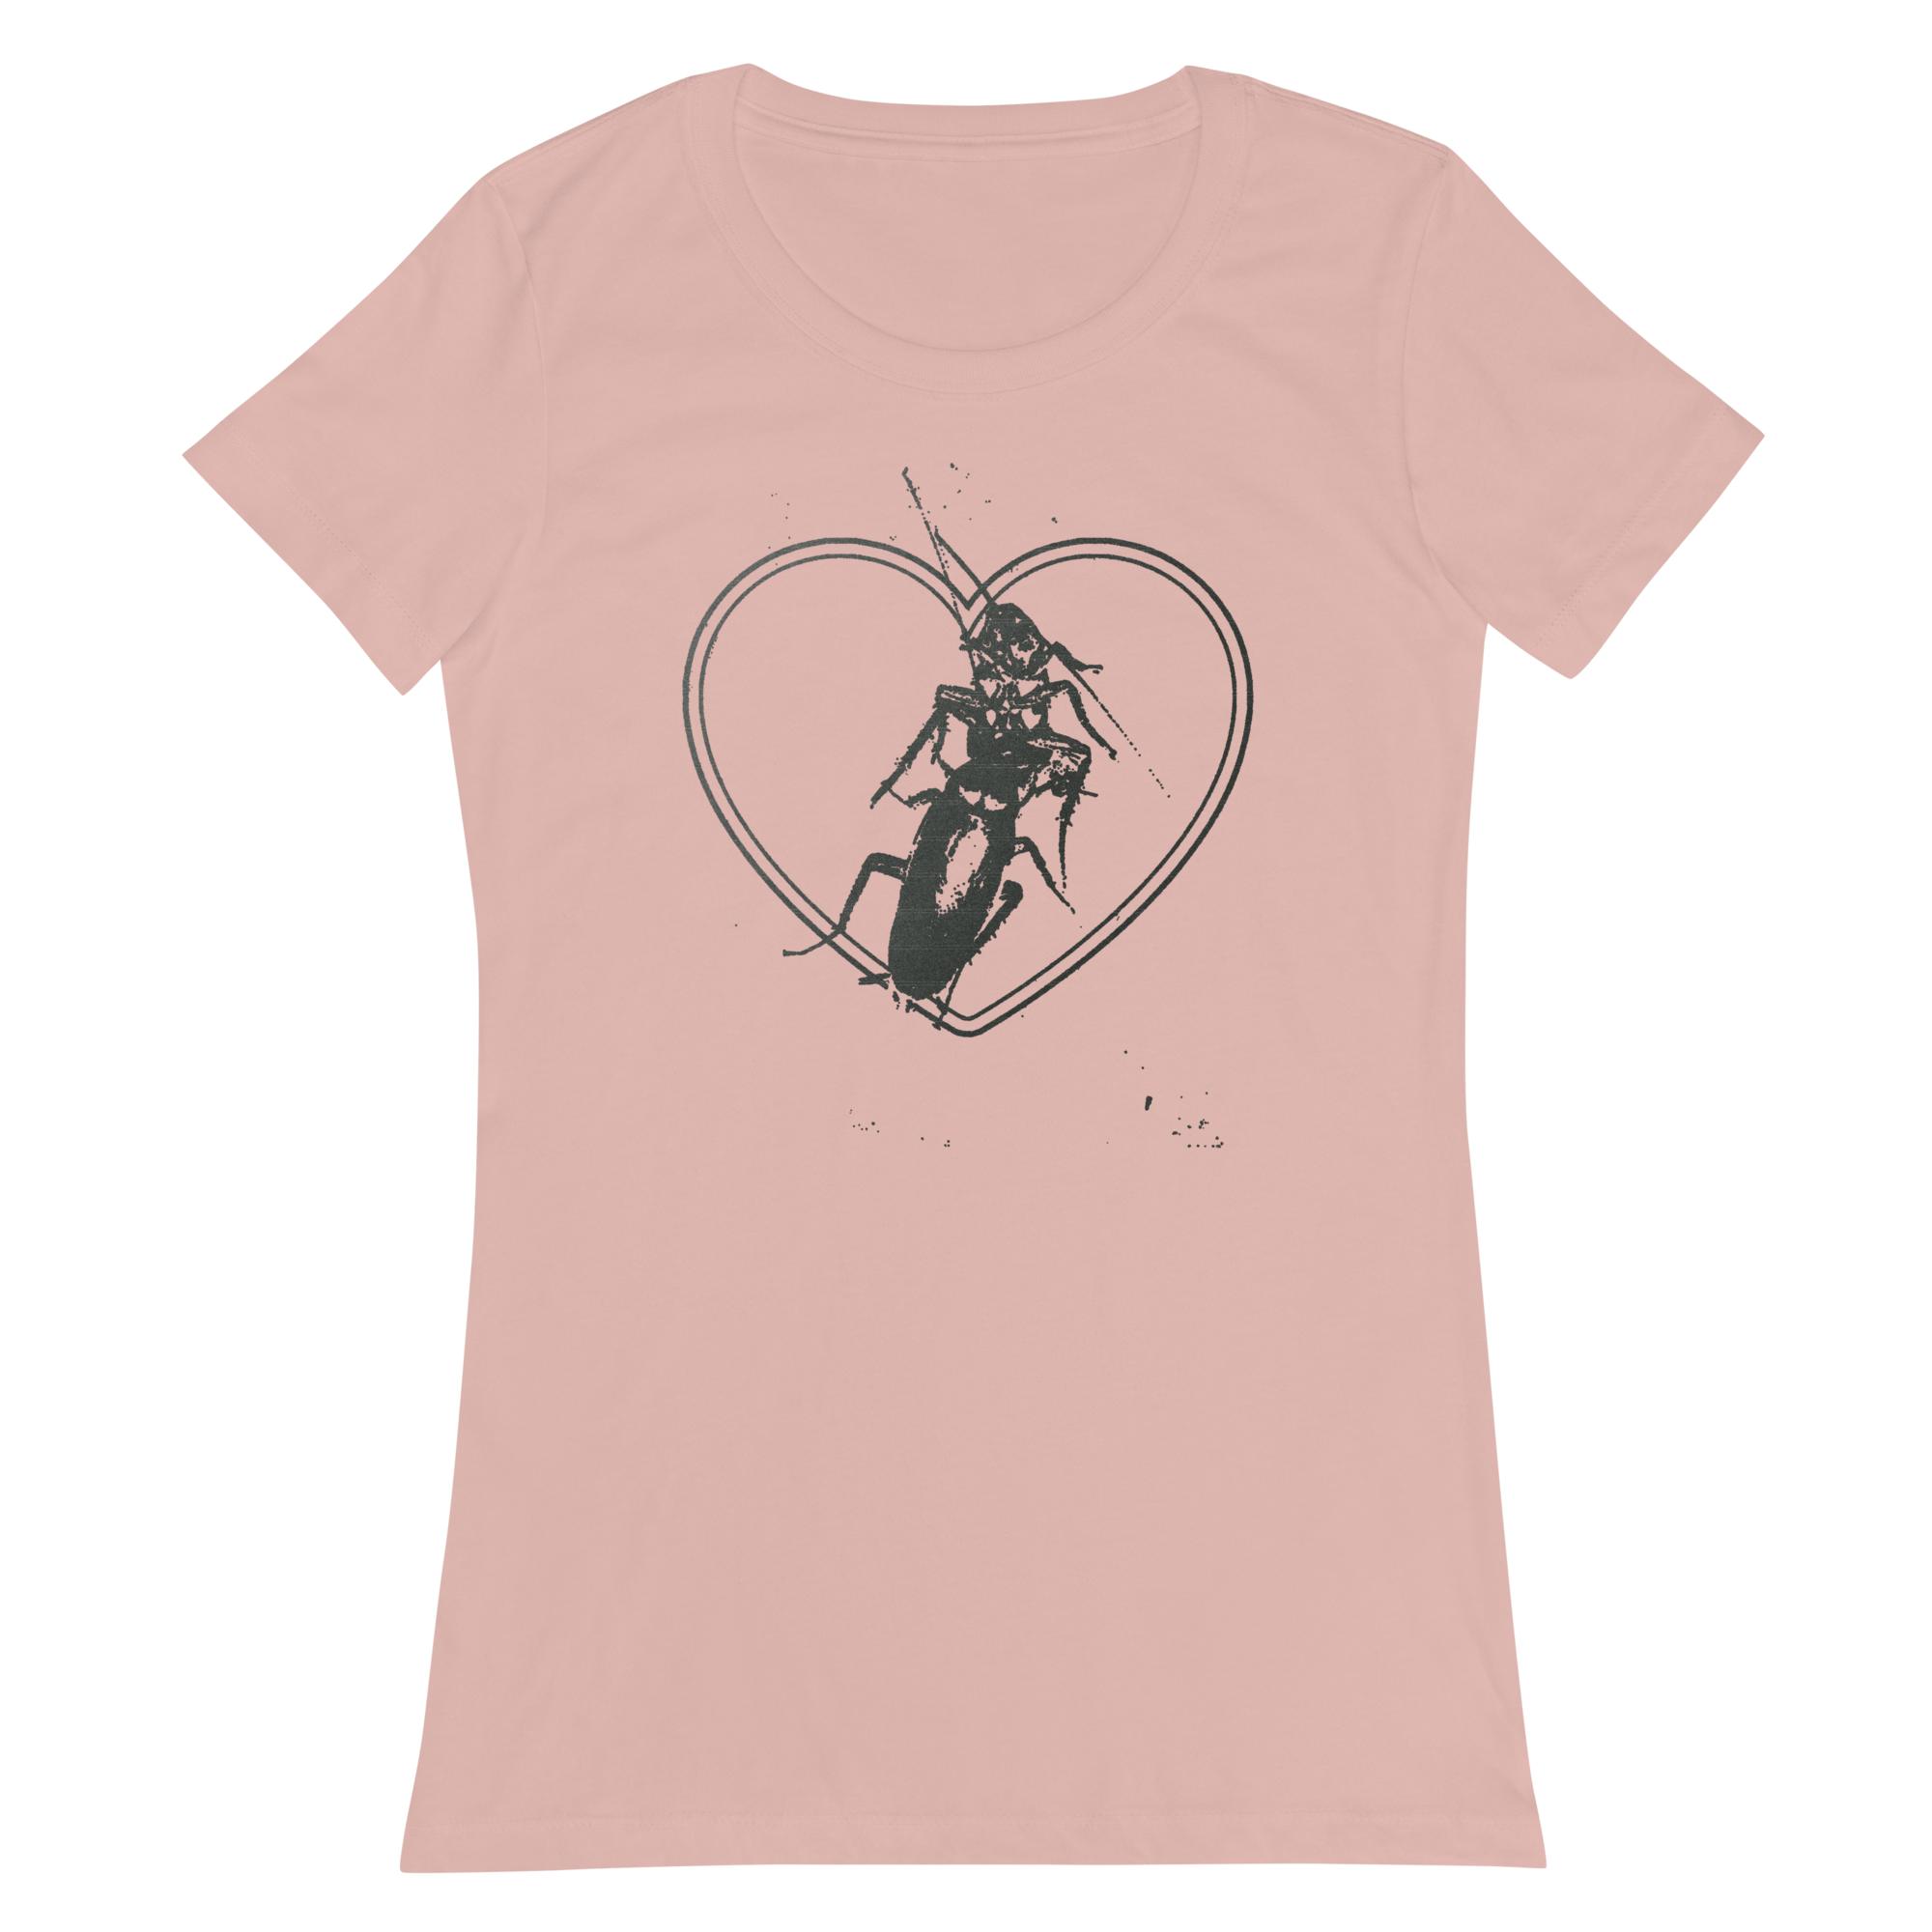 COCKROACHES FITTED GIRLY STYLE TEE